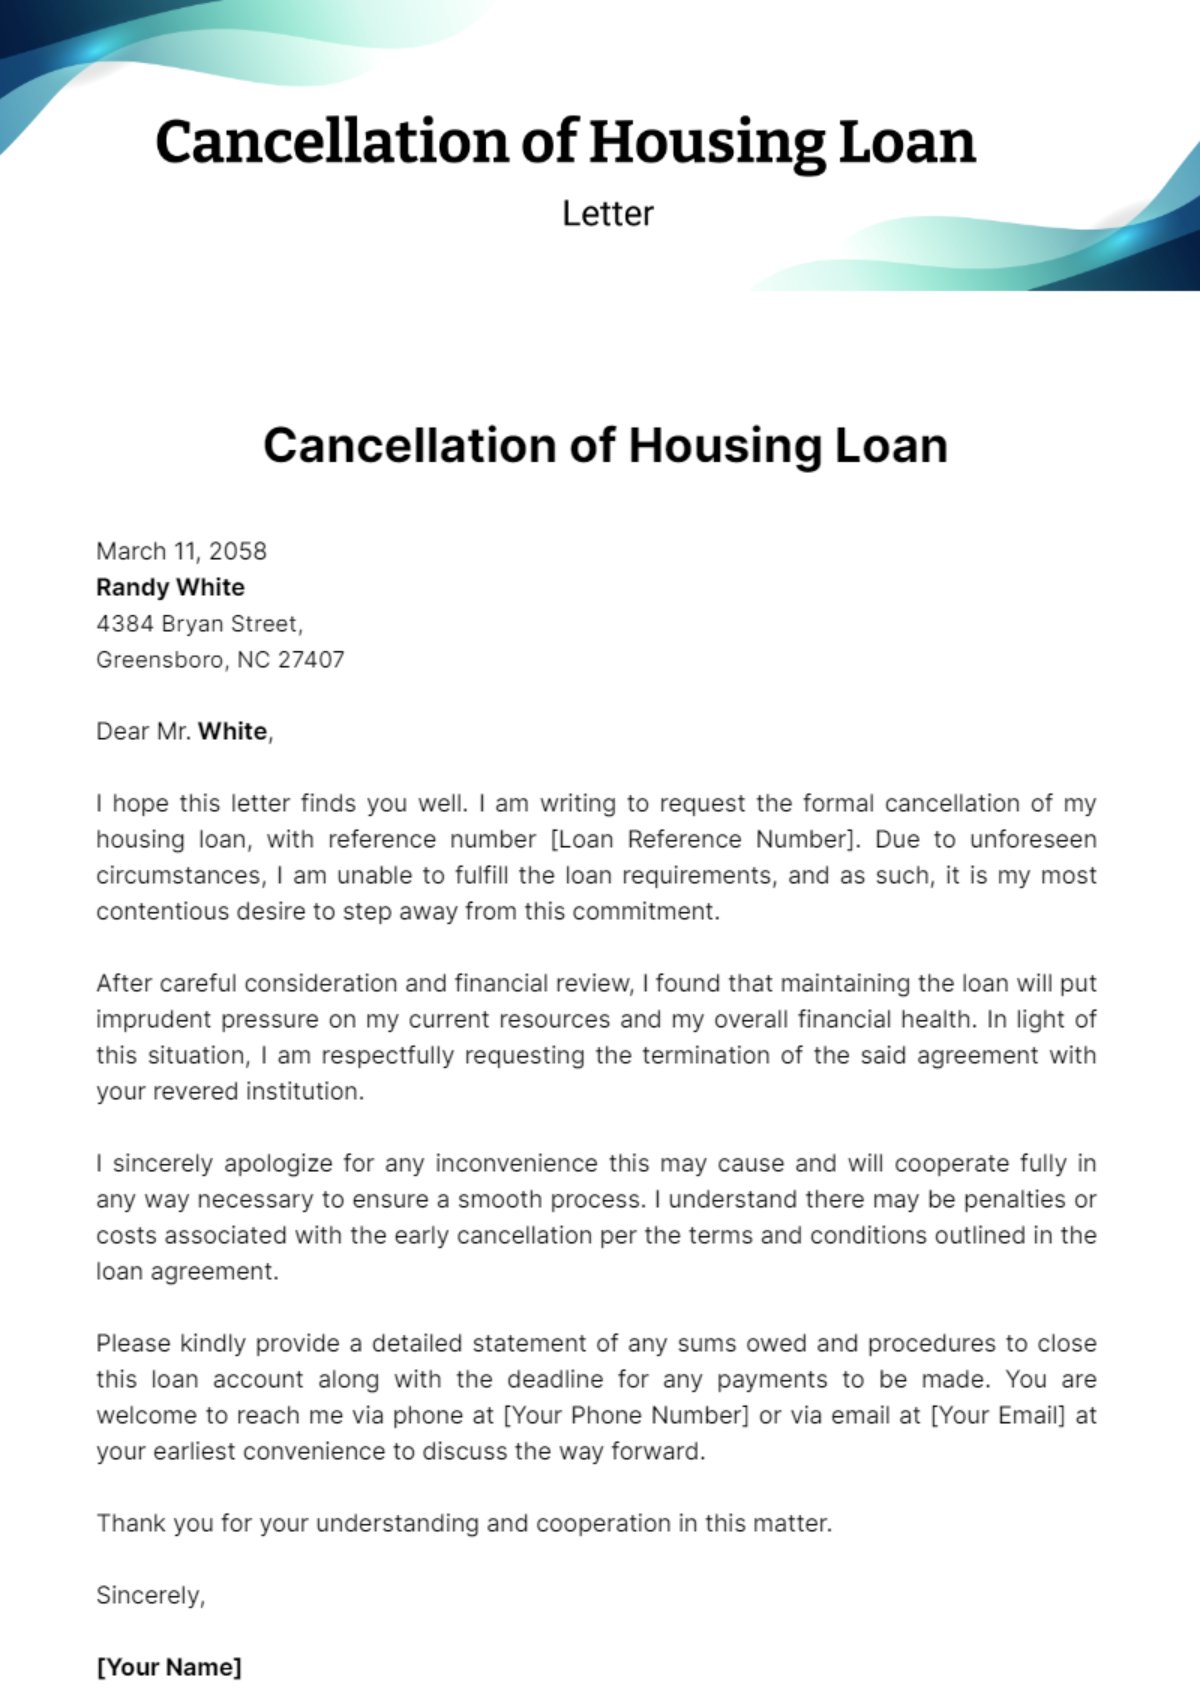 Free Cancellation of Housing Loan Letter Template